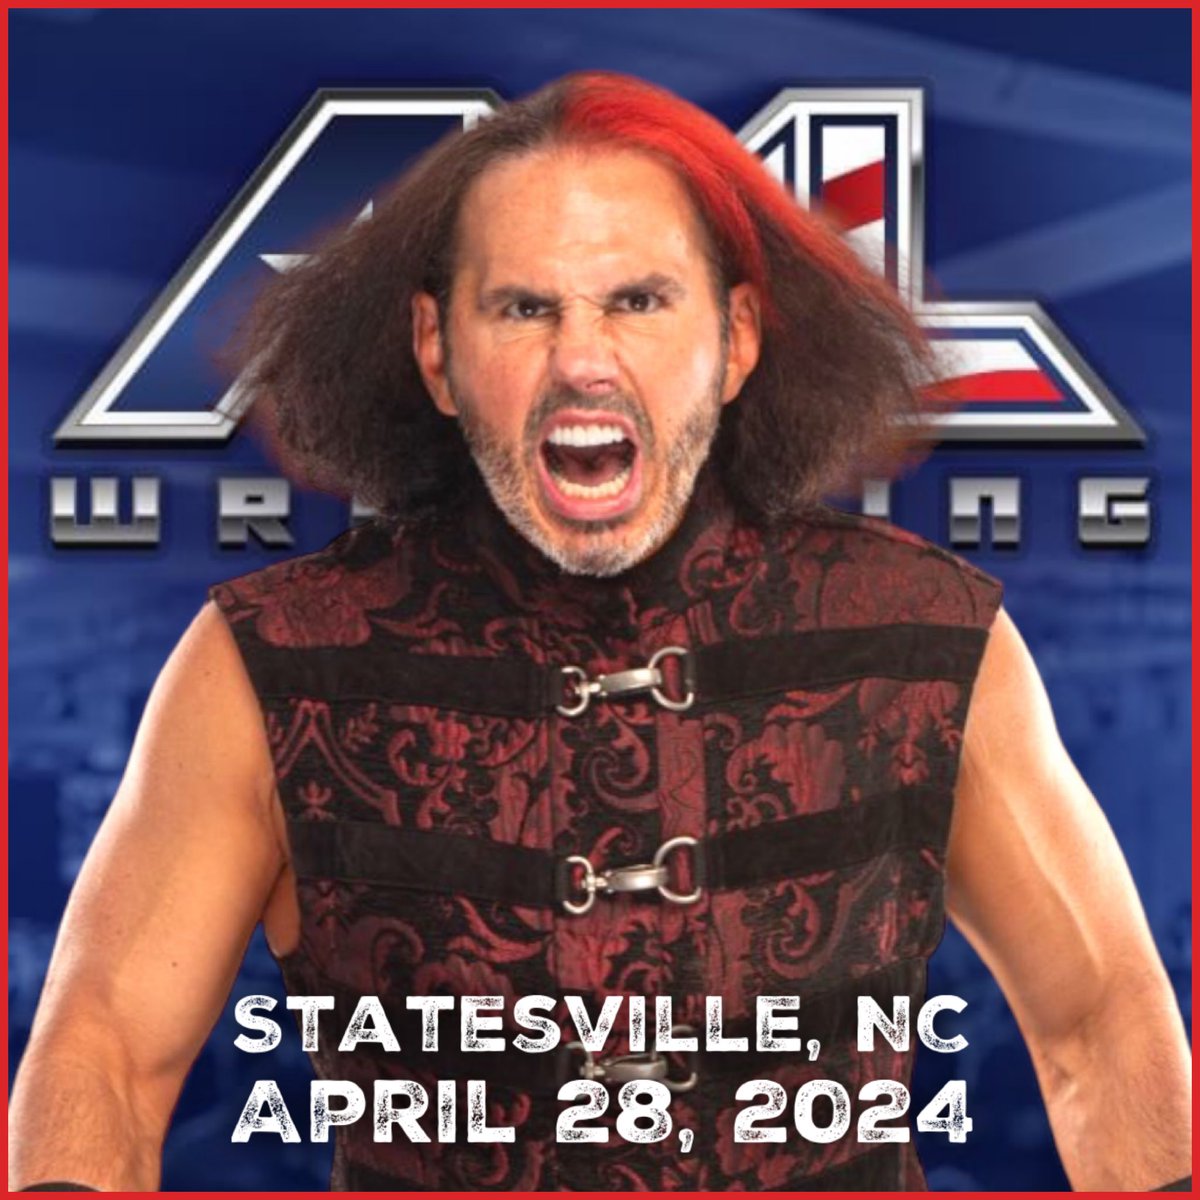 🚨 BREAKING! Meet Special Guest Matt Hardy when AML Wrestling comes to #Statesville, NC. 4/28/24 West Iredell HS Statesville, NC Meet The Stars at 2pm First Match at 4pm AMLWrestling.com